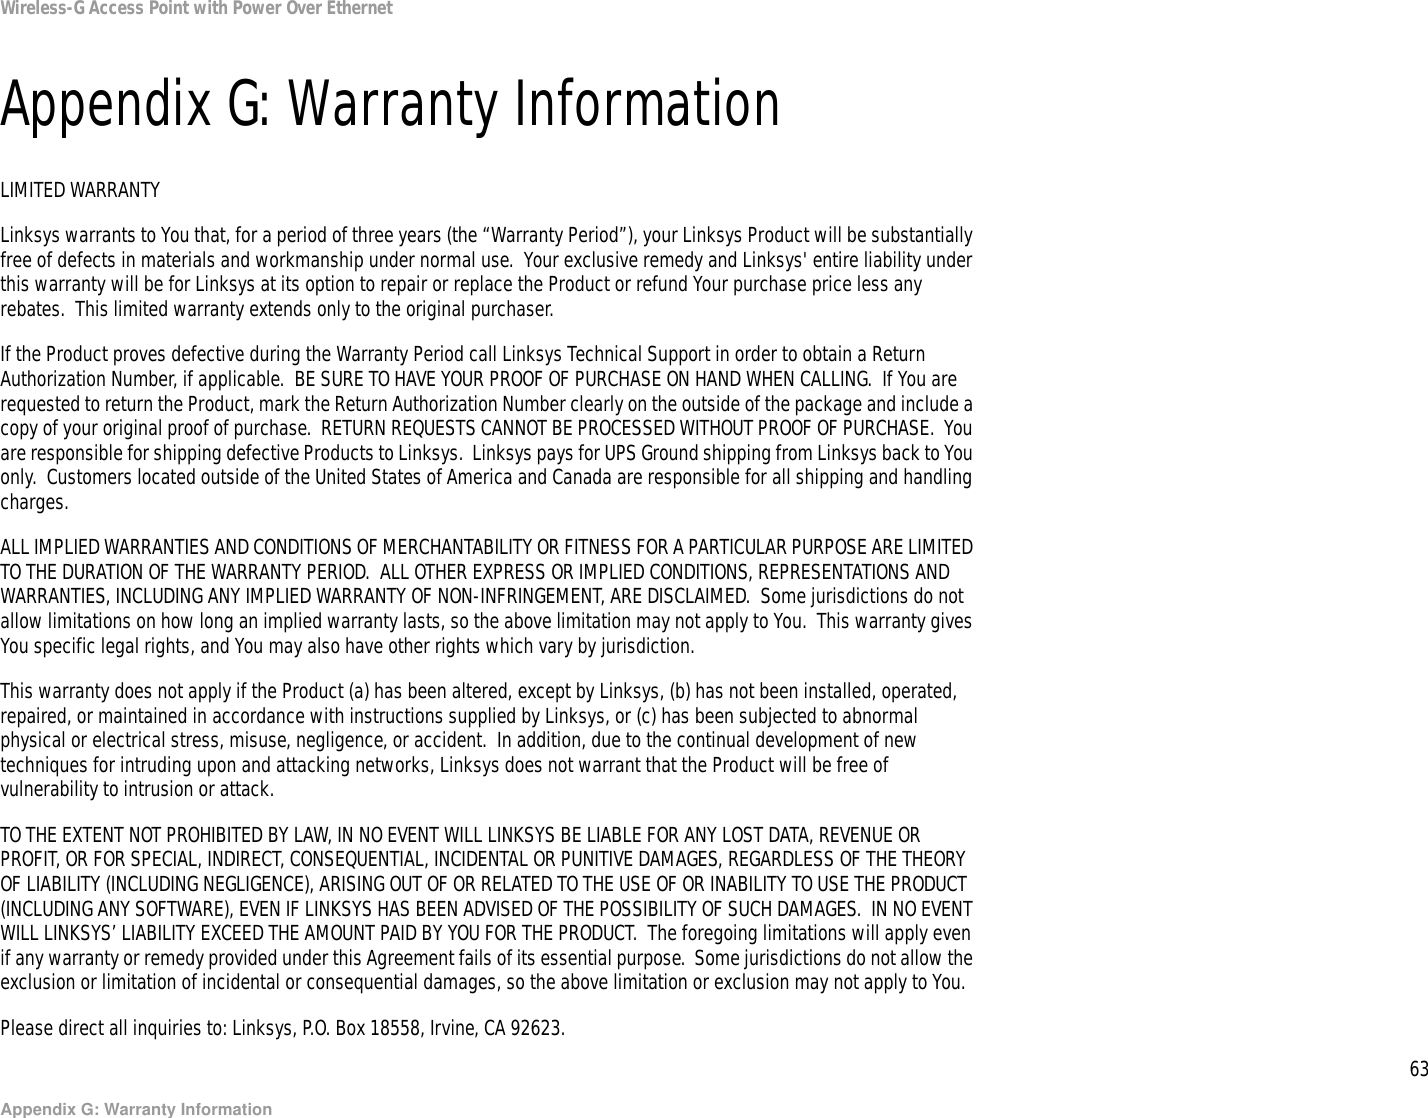 63Appendix G: Warranty InformationWireless-G Access Point with Power Over EthernetAppendix G: Warranty InformationLIMITED WARRANTYLinksys warrants to You that, for a period of three years (the “Warranty Period”), your Linksys Product will be substantially free of defects in materials and workmanship under normal use.  Your exclusive remedy and Linksys&apos; entire liability under this warranty will be for Linksys at its option to repair or replace the Product or refund Your purchase price less any rebates.  This limited warranty extends only to the original purchaser.  If the Product proves defective during the Warranty Period call Linksys Technical Support in order to obtain a Return Authorization Number, if applicable.  BE SURE TO HAVE YOUR PROOF OF PURCHASE ON HAND WHEN CALLING.  If You are requested to return the Product, mark the Return Authorization Number clearly on the outside of the package and include a copy of your original proof of purchase.  RETURN REQUESTS CANNOT BE PROCESSED WITHOUT PROOF OF PURCHASE.  You are responsible for shipping defective Products to Linksys.  Linksys pays for UPS Ground shipping from Linksys back to You only.  Customers located outside of the United States of America and Canada are responsible for all shipping and handling charges. ALL IMPLIED WARRANTIES AND CONDITIONS OF MERCHANTABILITY OR FITNESS FOR A PARTICULAR PURPOSE ARE LIMITED TO THE DURATION OF THE WARRANTY PERIOD.  ALL OTHER EXPRESS OR IMPLIED CONDITIONS, REPRESENTATIONS AND WARRANTIES, INCLUDING ANY IMPLIED WARRANTY OF NON-INFRINGEMENT, ARE DISCLAIMED.  Some jurisdictions do not allow limitations on how long an implied warranty lasts, so the above limitation may not apply to You.  This warranty gives You specific legal rights, and You may also have other rights which vary by jurisdiction.This warranty does not apply if the Product (a) has been altered, except by Linksys, (b) has not been installed, operated, repaired, or maintained in accordance with instructions supplied by Linksys, or (c) has been subjected to abnormal physical or electrical stress, misuse, negligence, or accident.  In addition, due to the continual development of new techniques for intruding upon and attacking networks, Linksys does not warrant that the Product will be free of vulnerability to intrusion or attack.TO THE EXTENT NOT PROHIBITED BY LAW, IN NO EVENT WILL LINKSYS BE LIABLE FOR ANY LOST DATA, REVENUE OR PROFIT, OR FOR SPECIAL, INDIRECT, CONSEQUENTIAL, INCIDENTAL OR PUNITIVE DAMAGES, REGARDLESS OF THE THEORY OF LIABILITY (INCLUDING NEGLIGENCE), ARISING OUT OF OR RELATED TO THE USE OF OR INABILITY TO USE THE PRODUCT (INCLUDING ANY SOFTWARE), EVEN IF LINKSYS HAS BEEN ADVISED OF THE POSSIBILITY OF SUCH DAMAGES.  IN NO EVENT WILL LINKSYS’ LIABILITY EXCEED THE AMOUNT PAID BY YOU FOR THE PRODUCT.  The foregoing limitations will apply even if any warranty or remedy provided under this Agreement fails of its essential purpose.  Some jurisdictions do not allow the exclusion or limitation of incidental or consequential damages, so the above limitation or exclusion may not apply to You.Please direct all inquiries to: Linksys, P.O. Box 18558, Irvine, CA 92623.